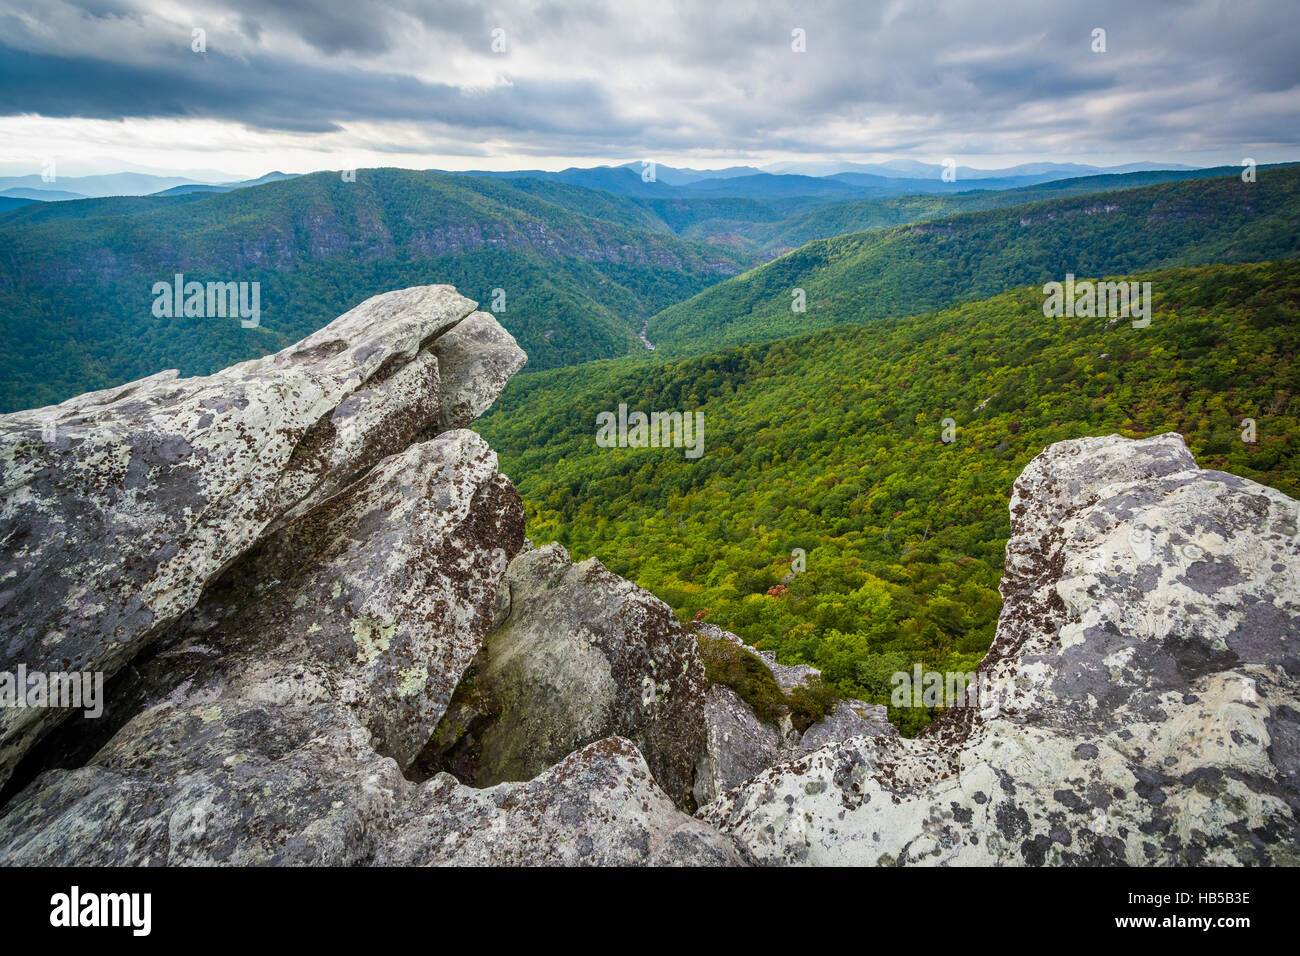 View of the Linville Gorge from Hawksbill Mountain, in Pisgah National Forest, North Carolina. Stock Photo